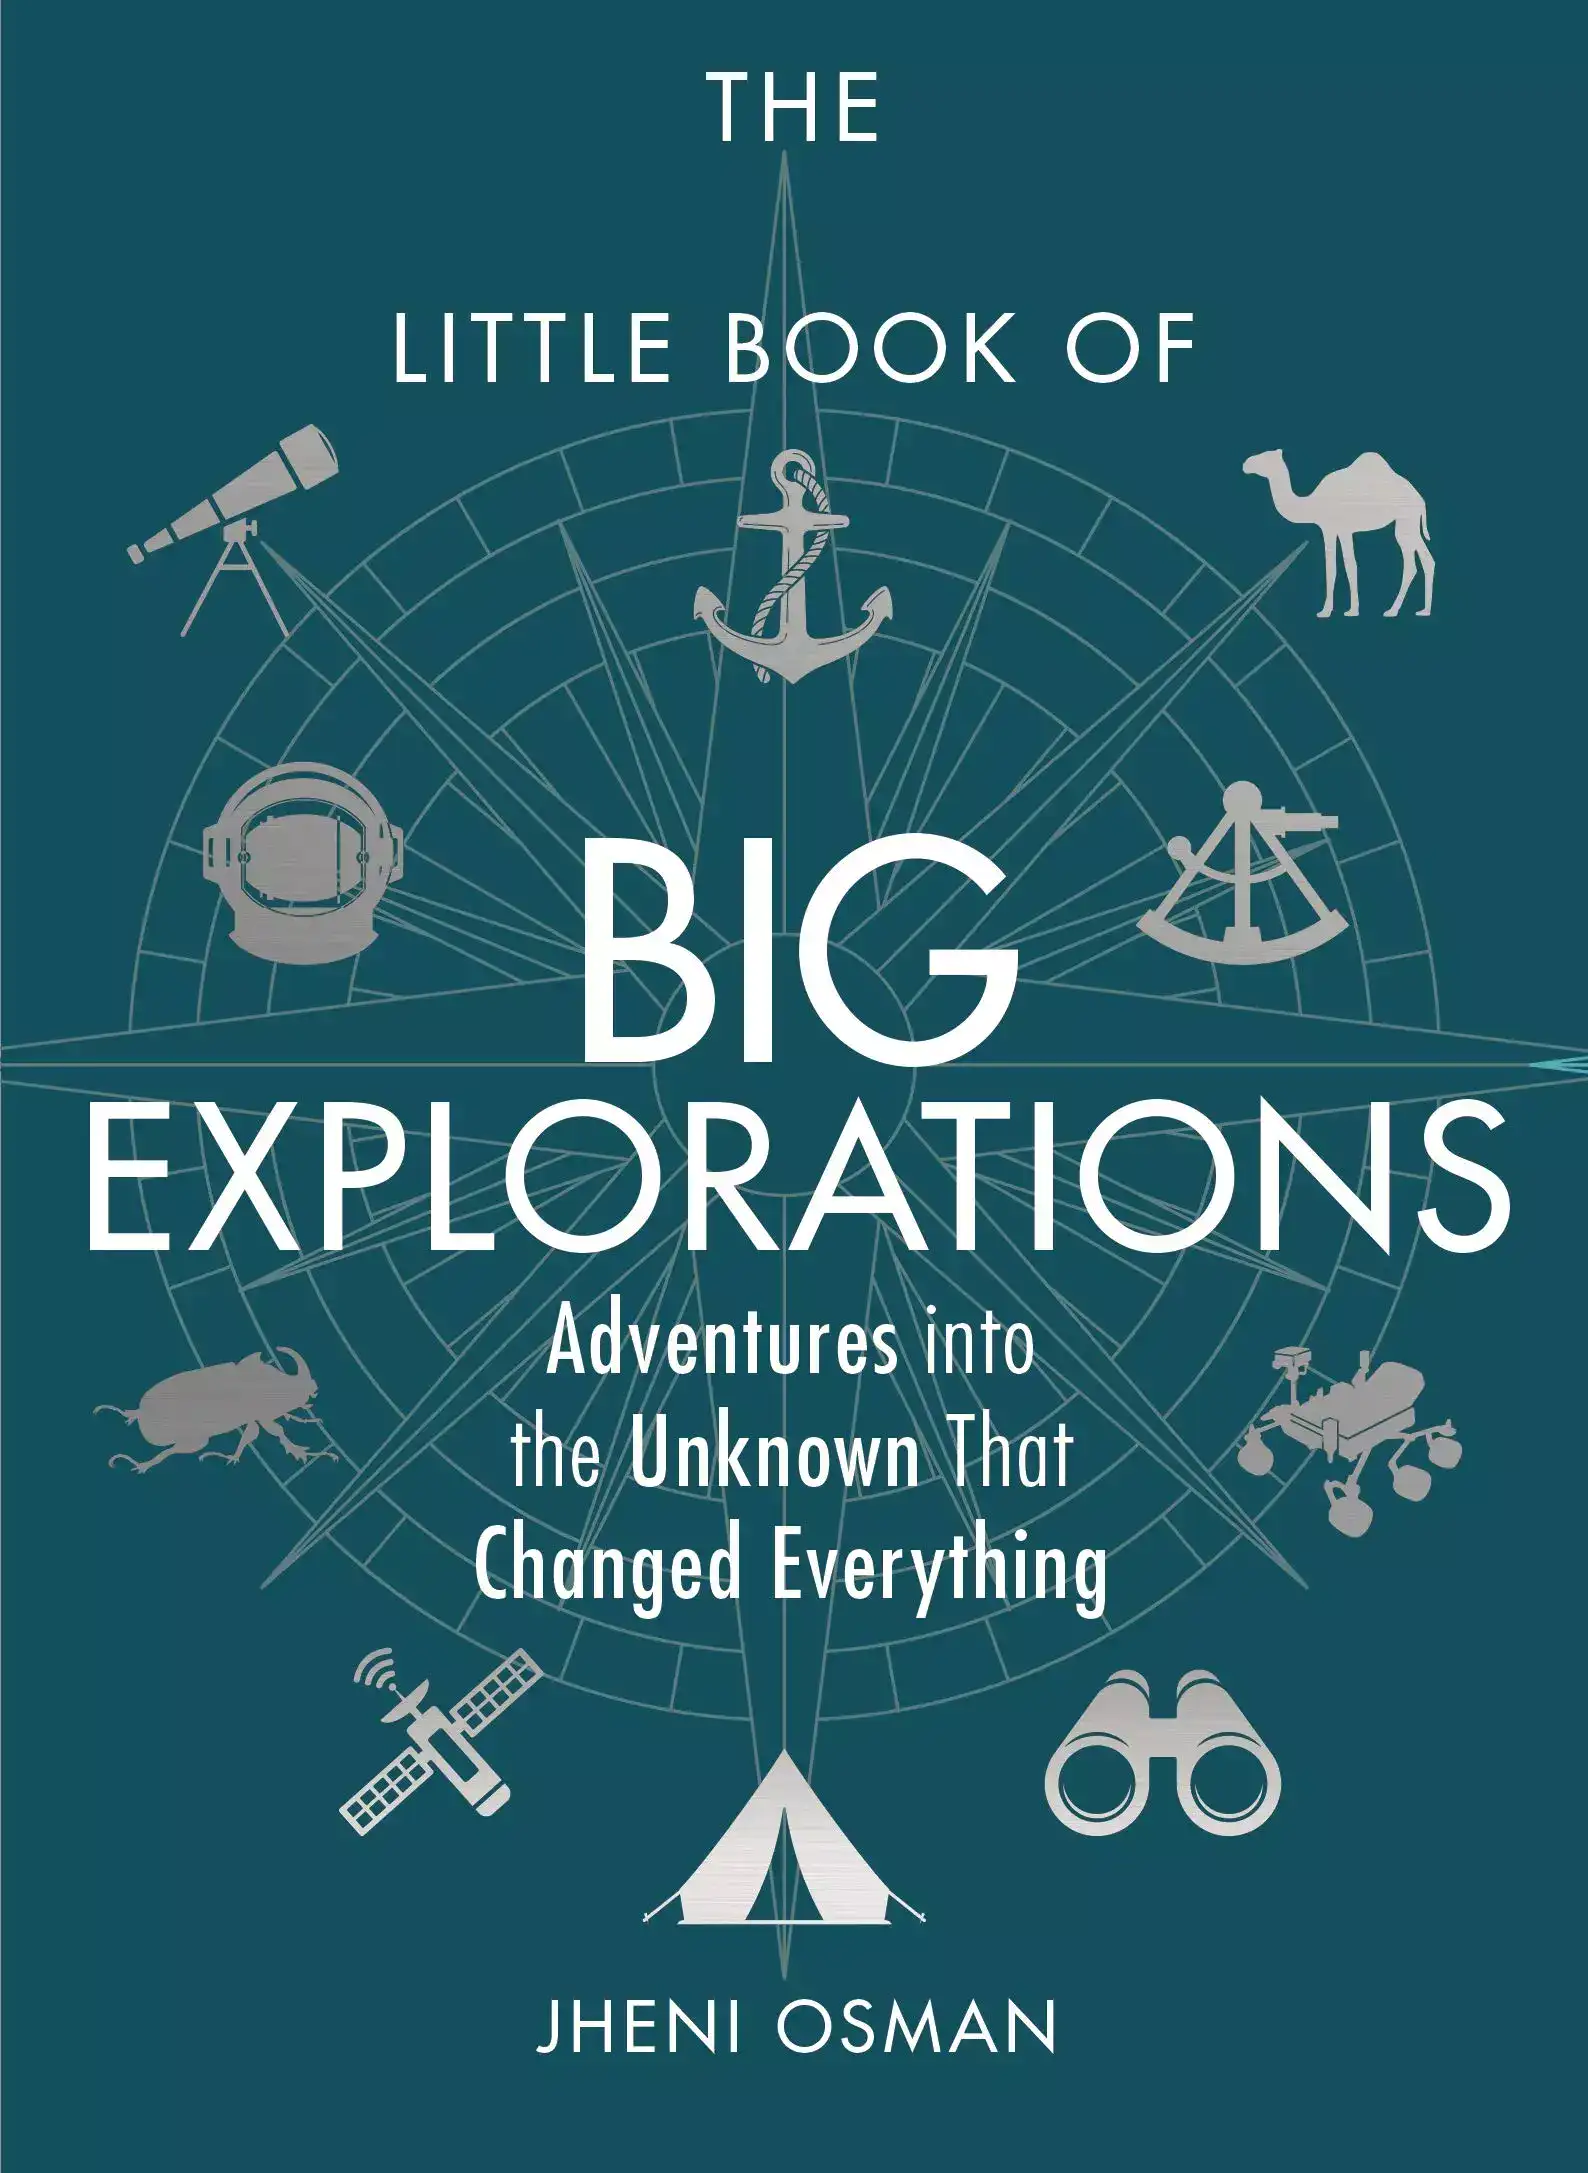 The Little Book of Big Explorations: Adventures into the Unknown That Changed Everything by Jheni Osma